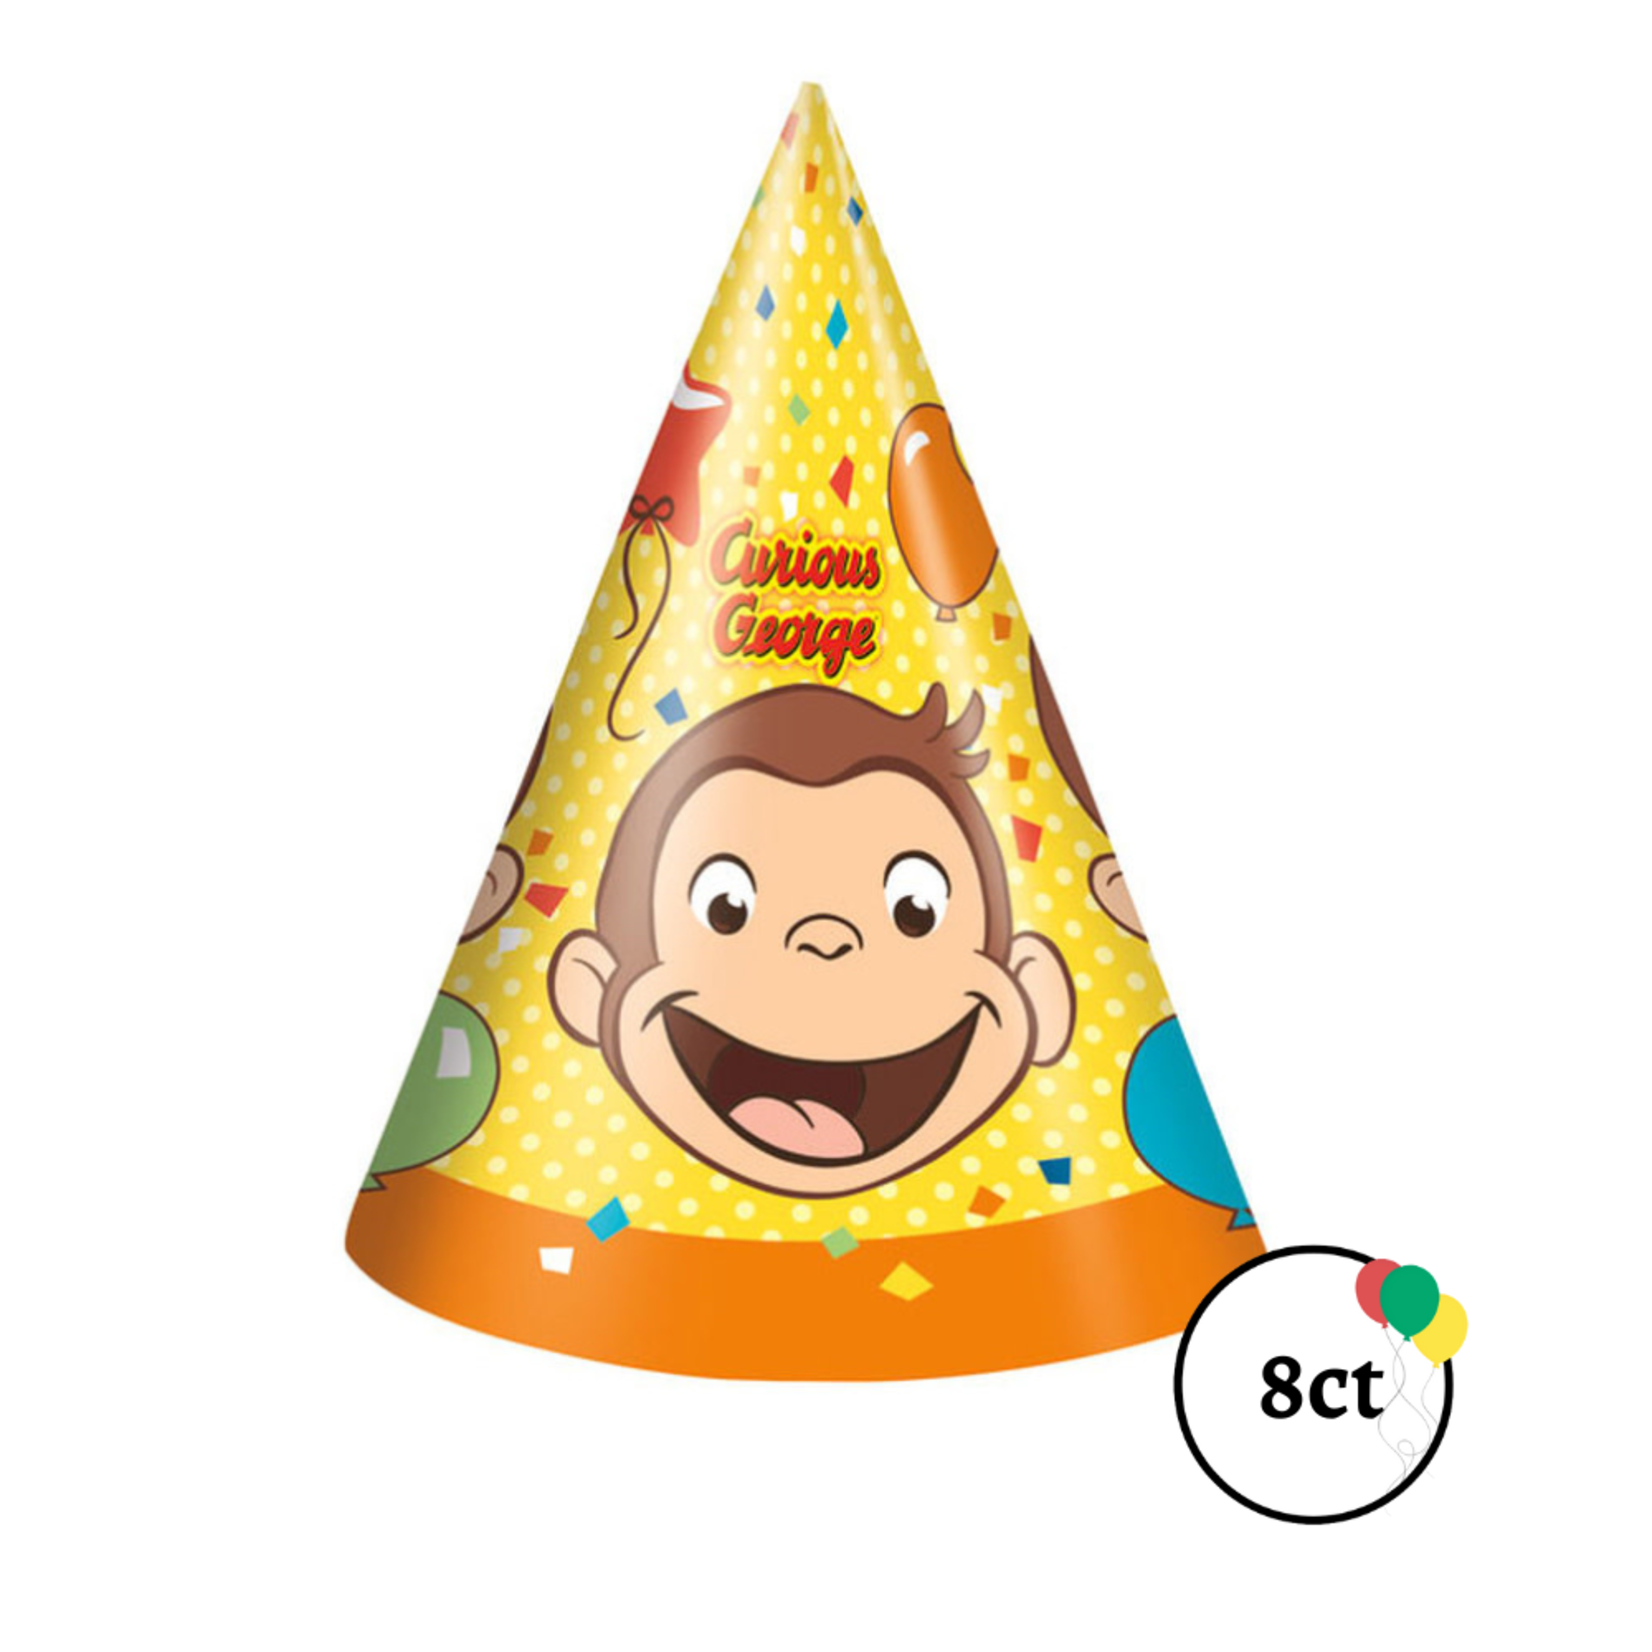 Curious George Party Hats 8ct